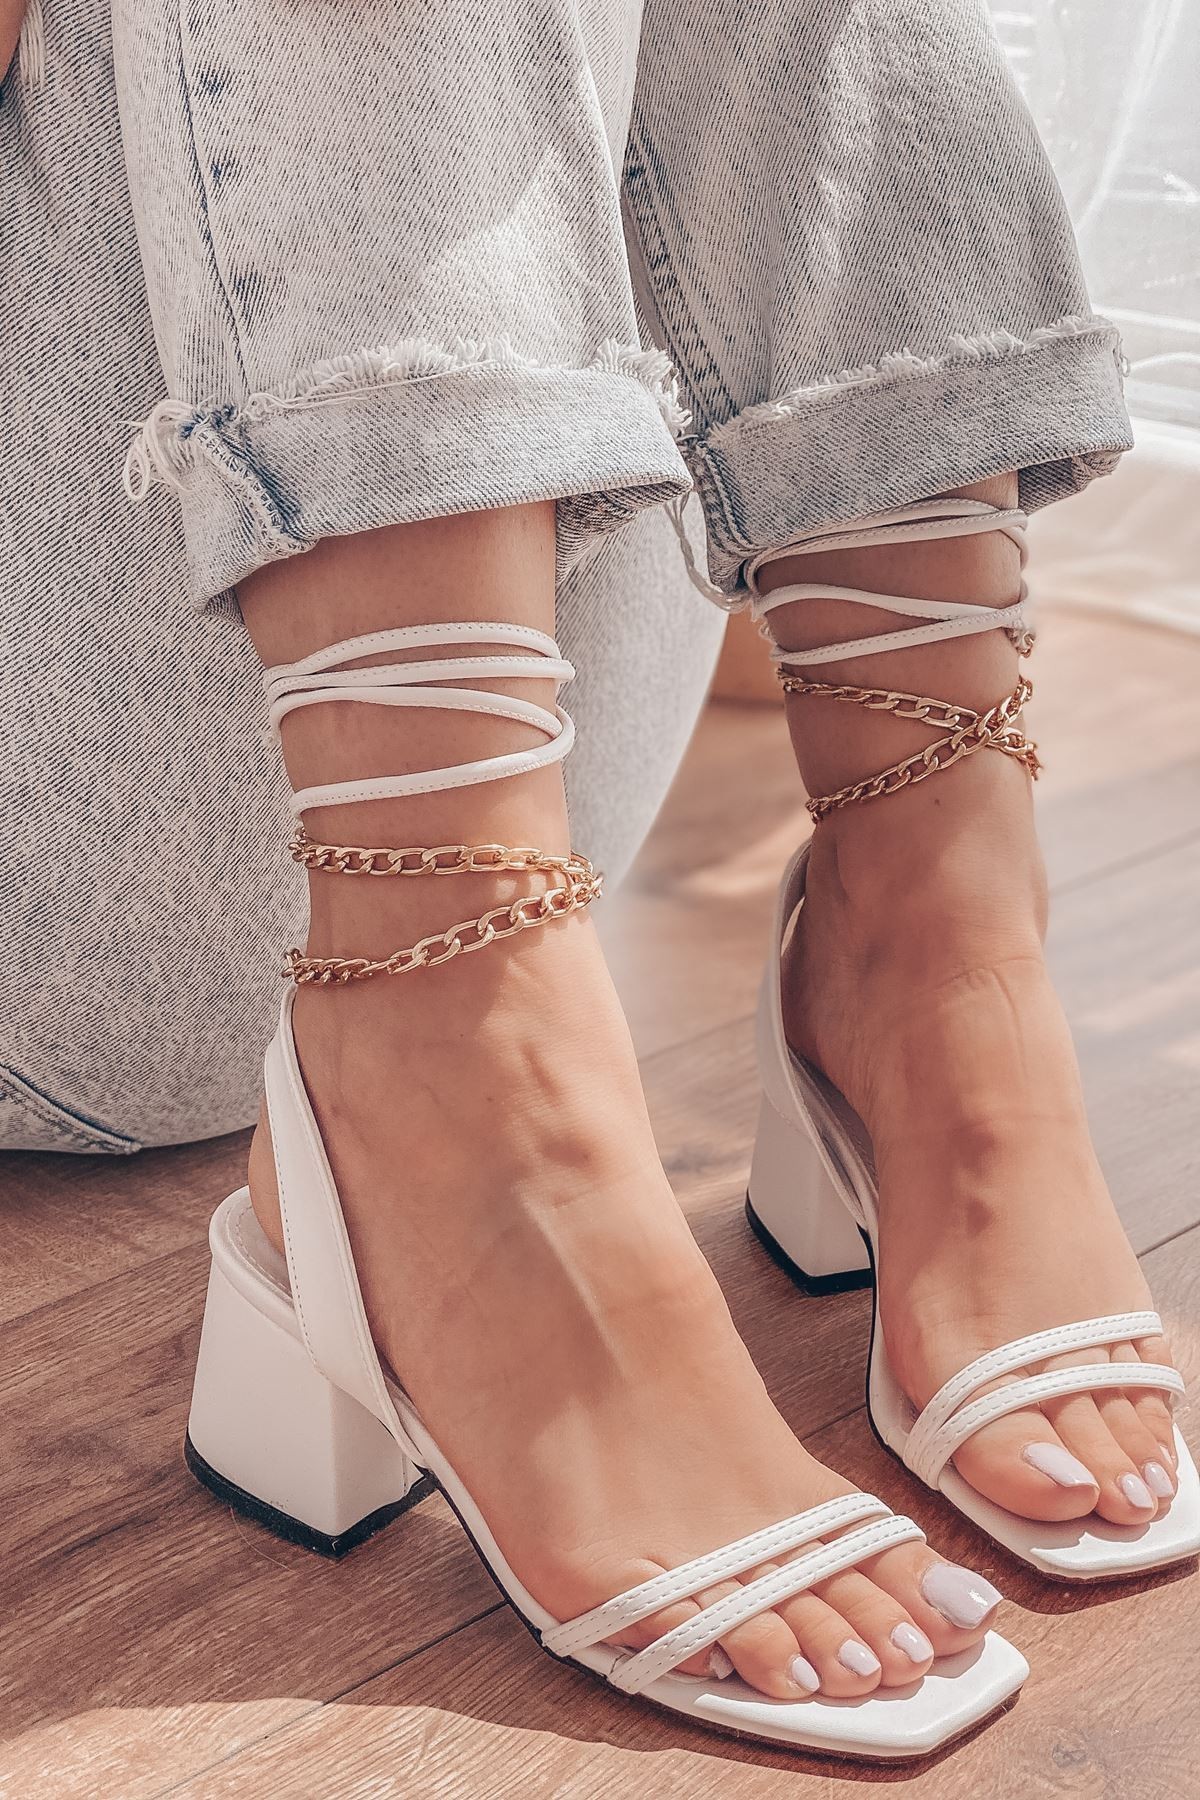 Bargeta matte leather short heeled shoes white